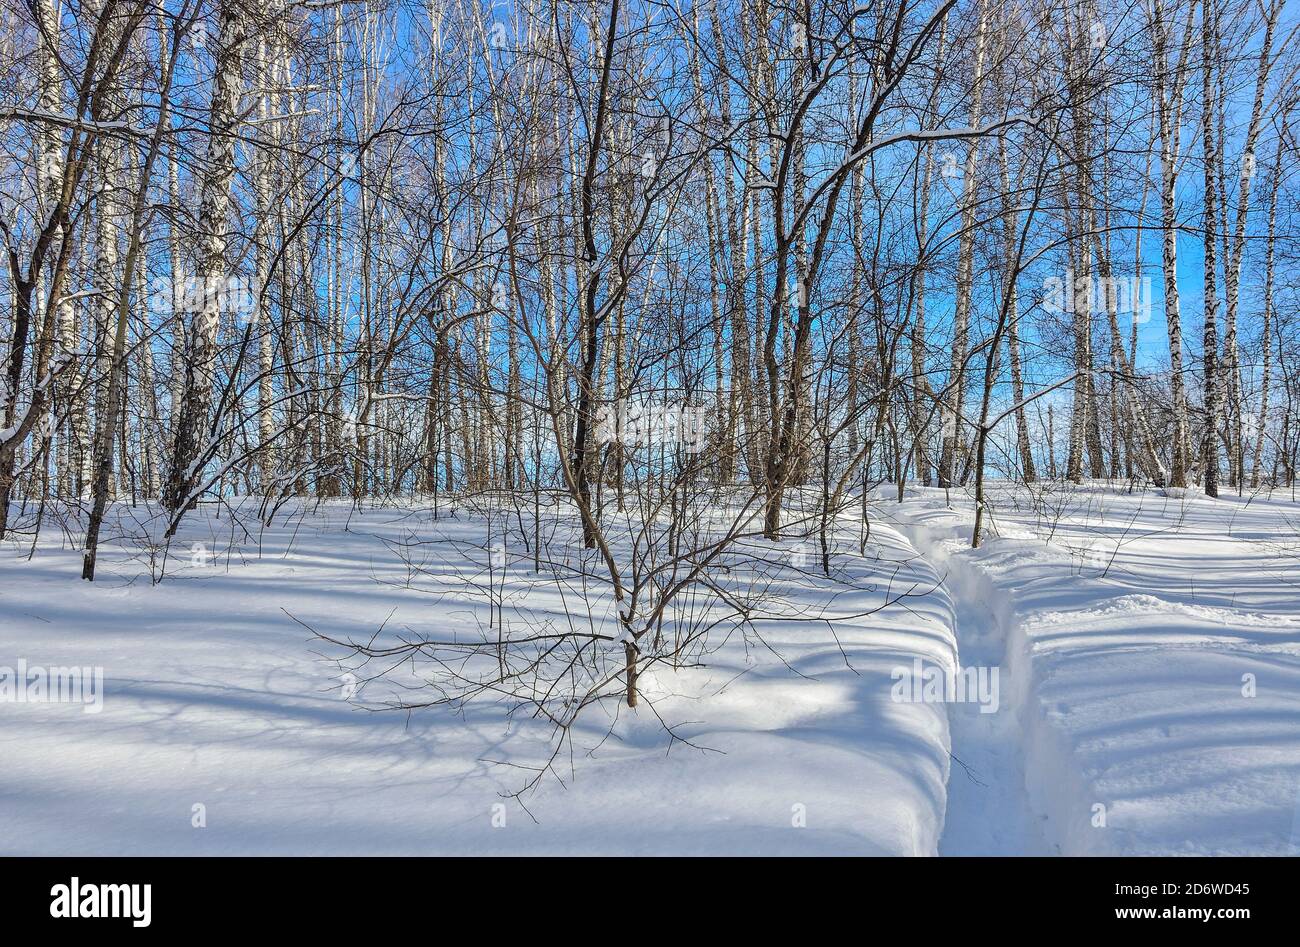 Wonderful winter landscape - narrow path in deep snow leading to birch forest. White clear snow, white birch trunks with sunlight illuminated on brigh Stock Photo